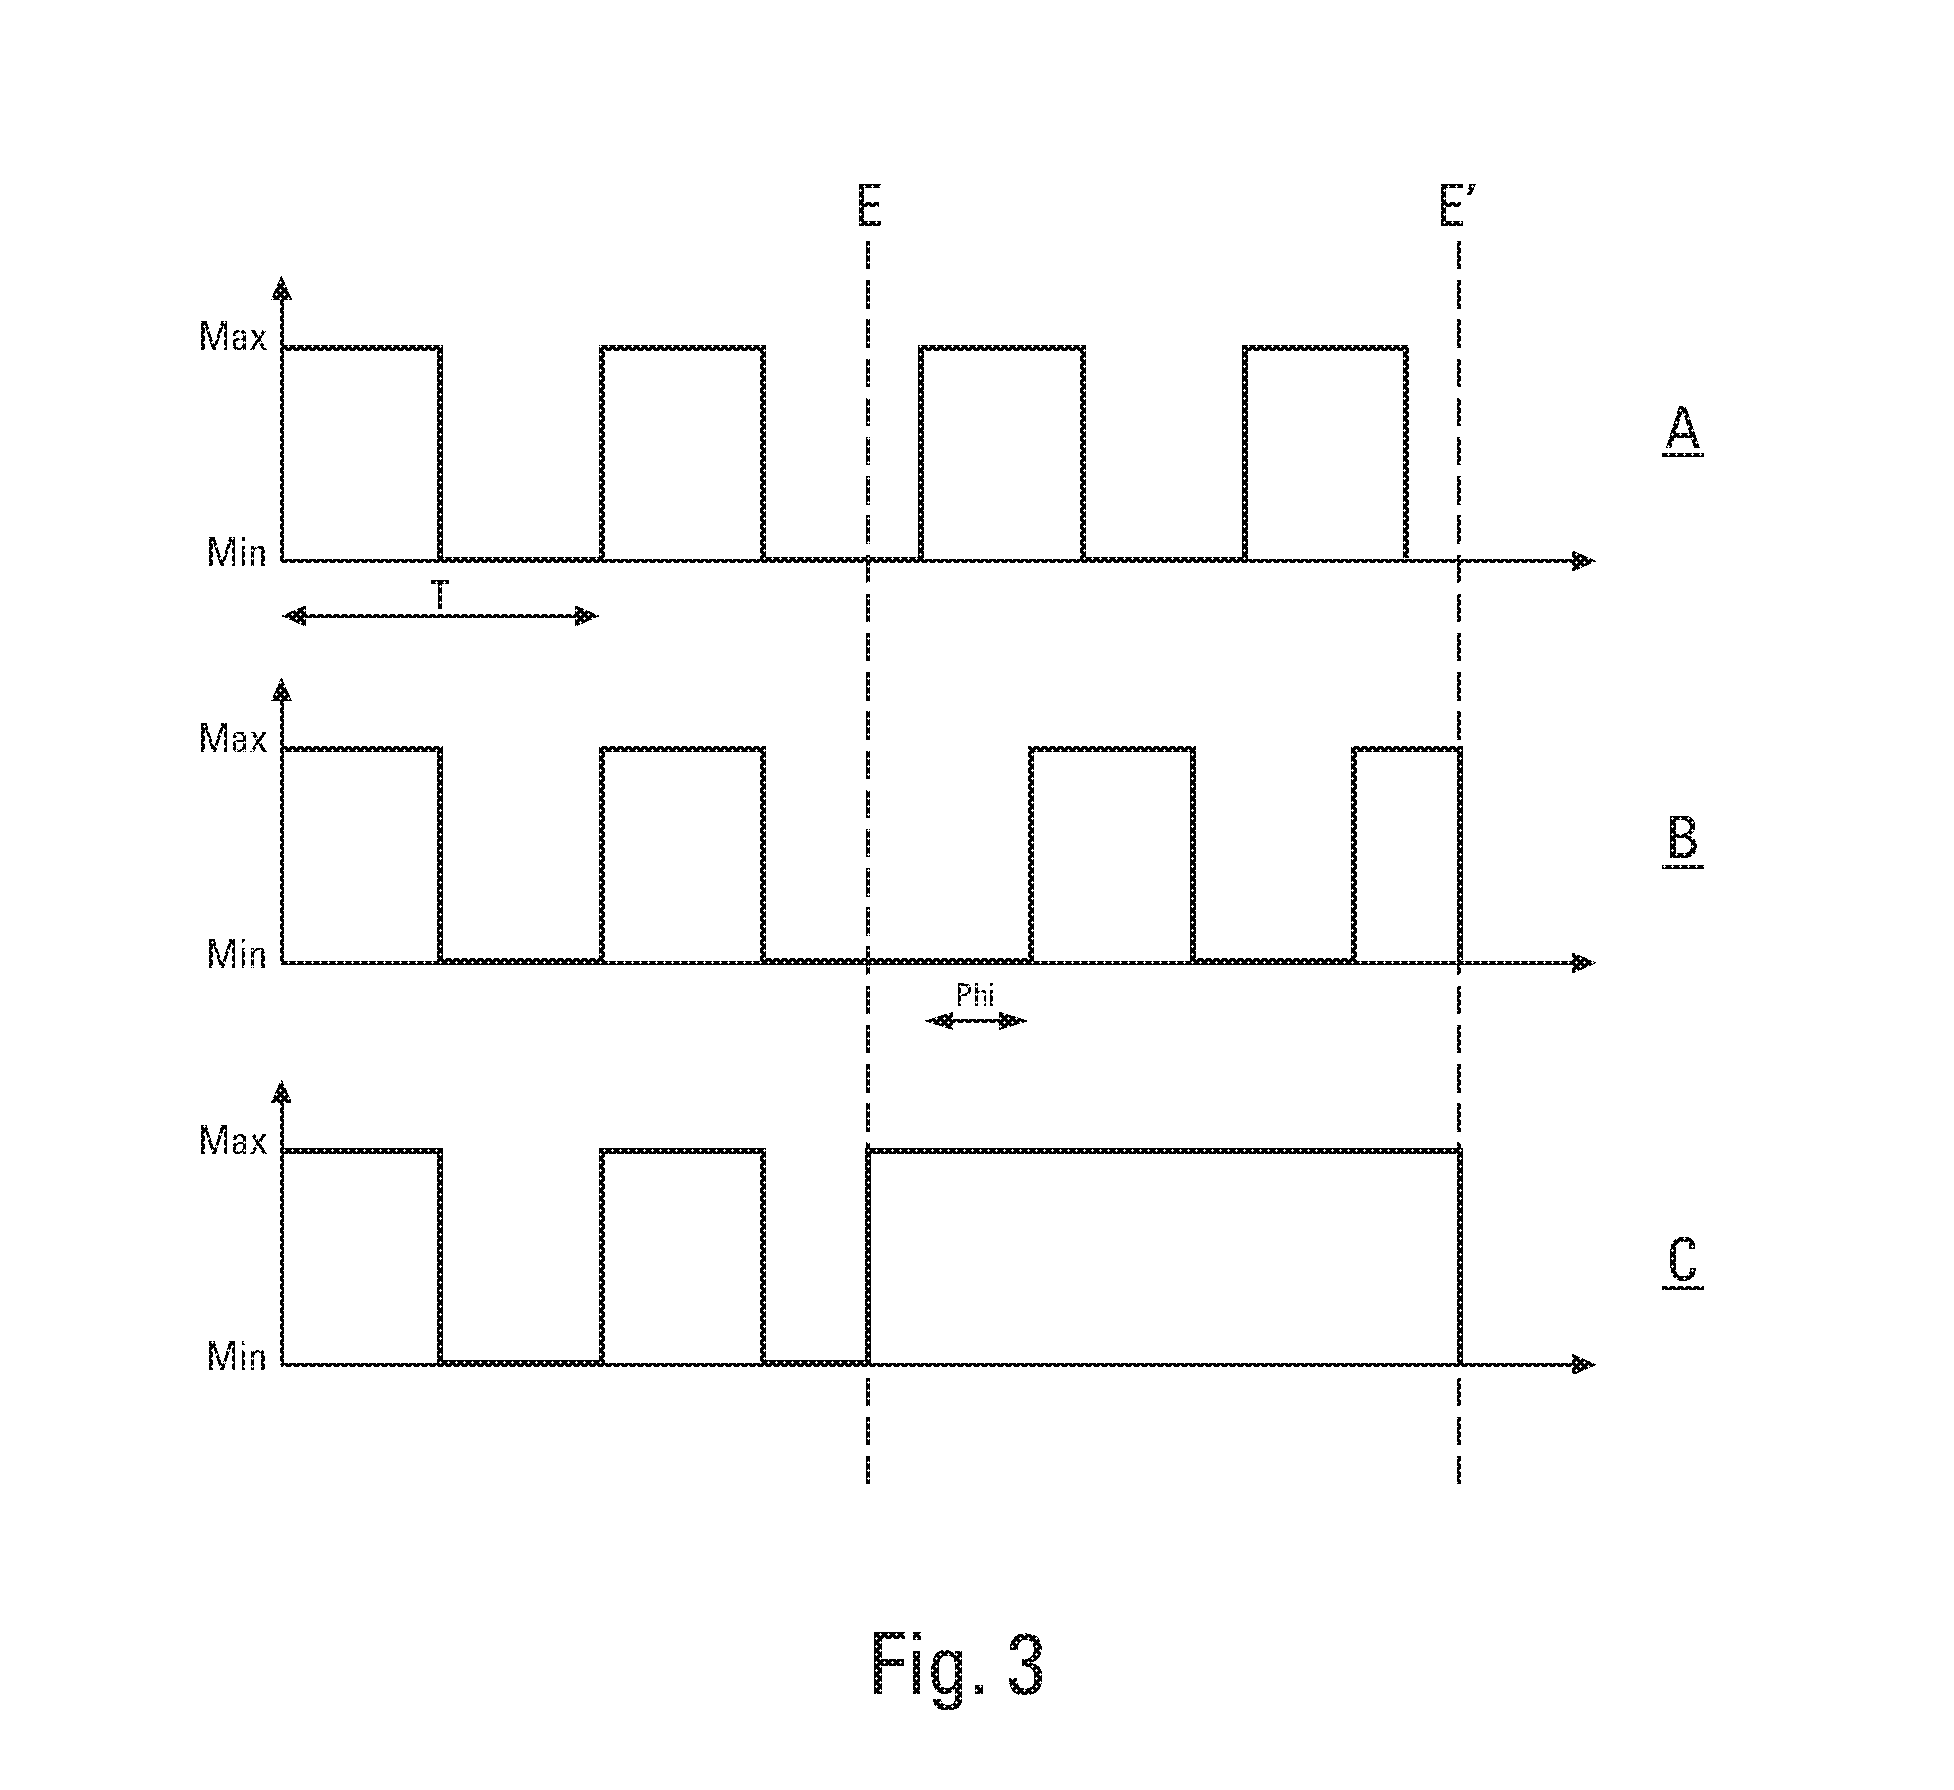 Driving assistance method and device